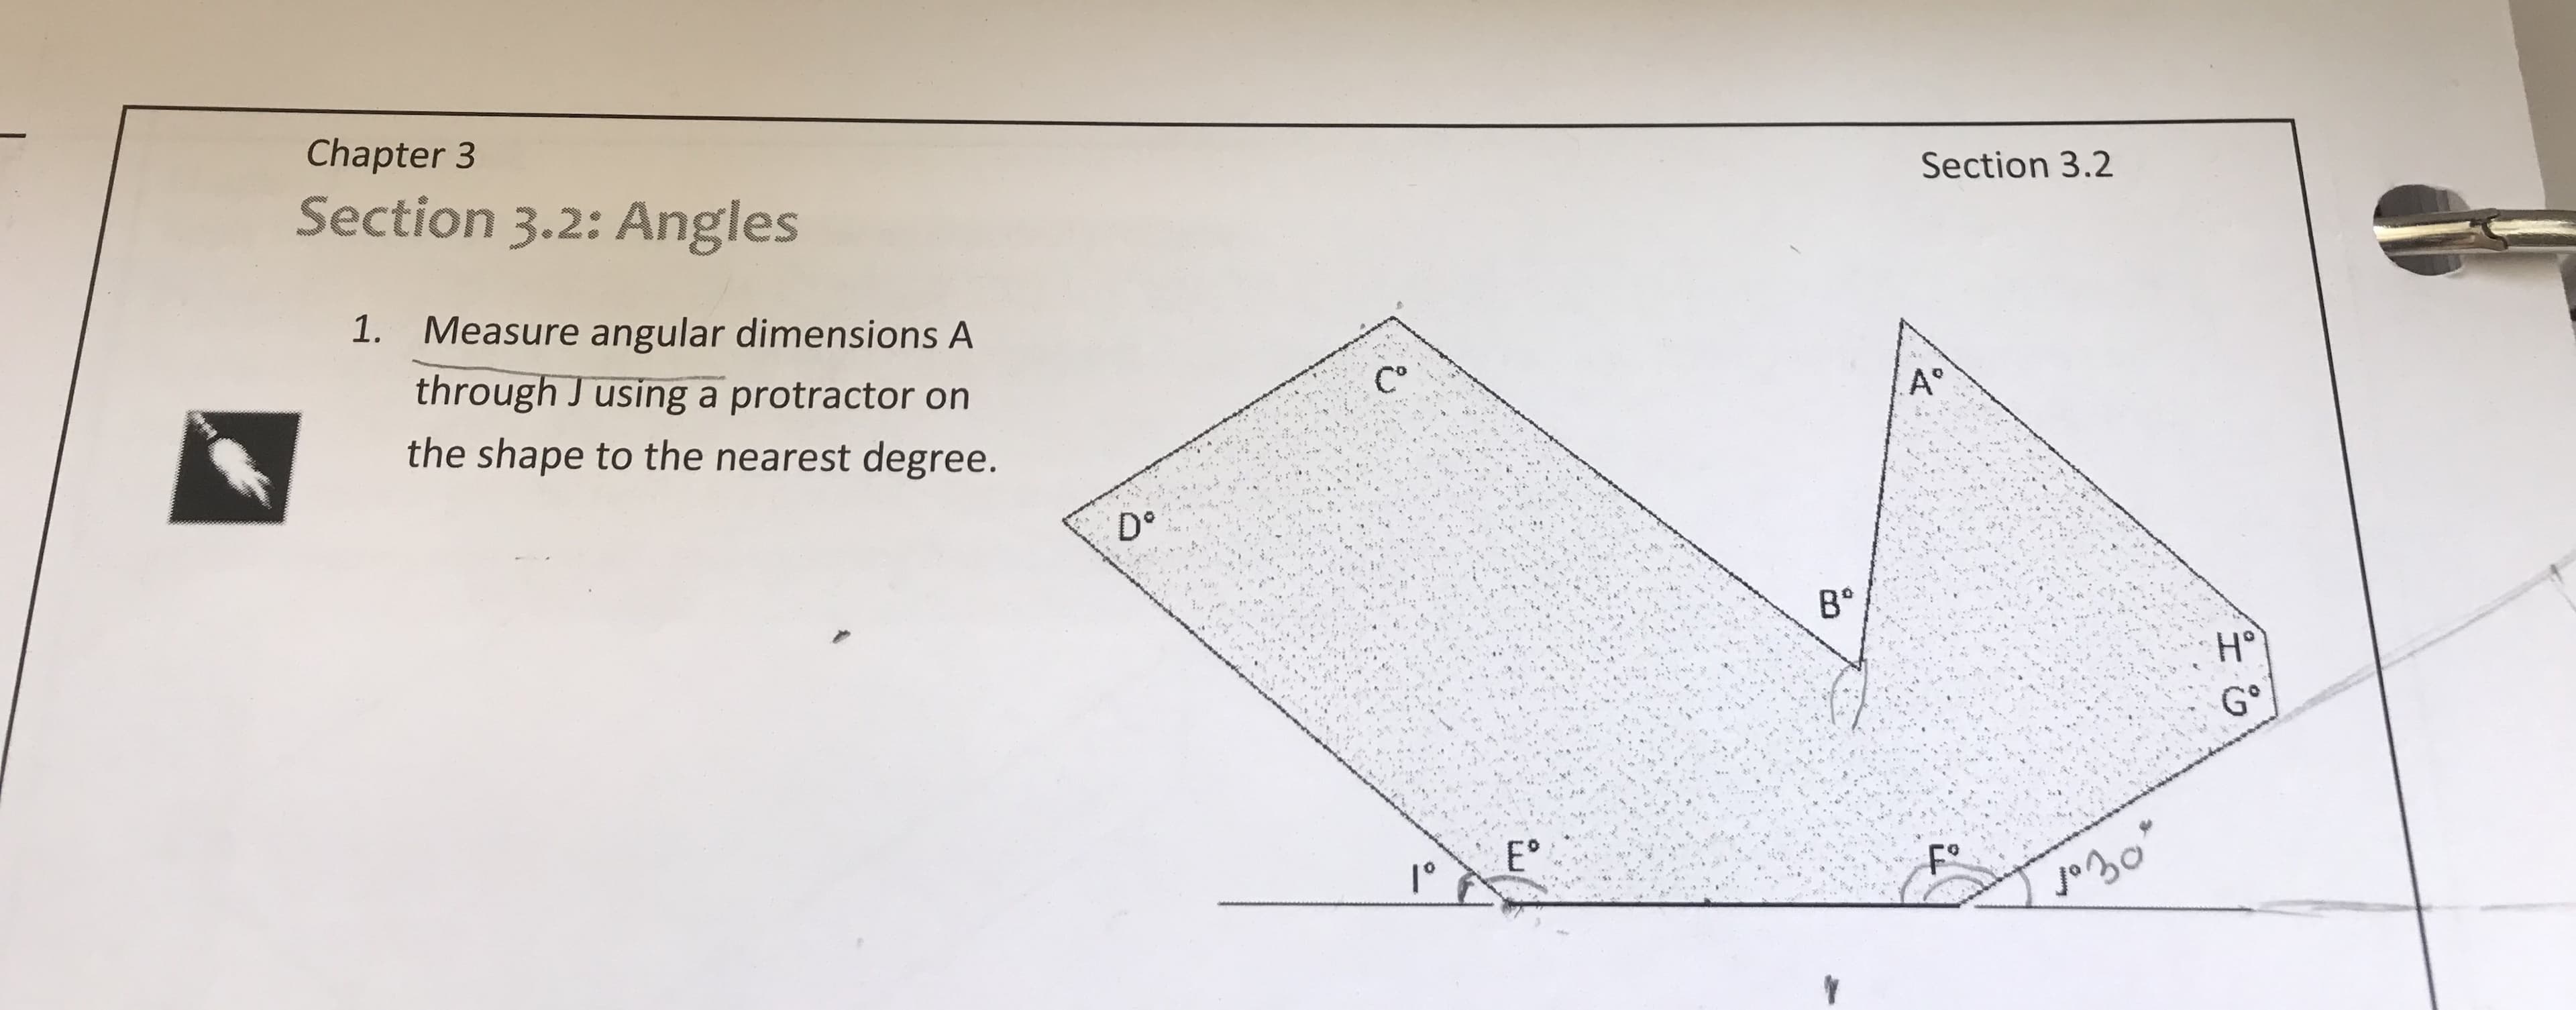 Chapter 3
Section 3.2
Section 3.2: Angles
Measure angular dimensions A
through J using a protractor on
the shape to the nearest degree.
1.
A°
В"
lo
